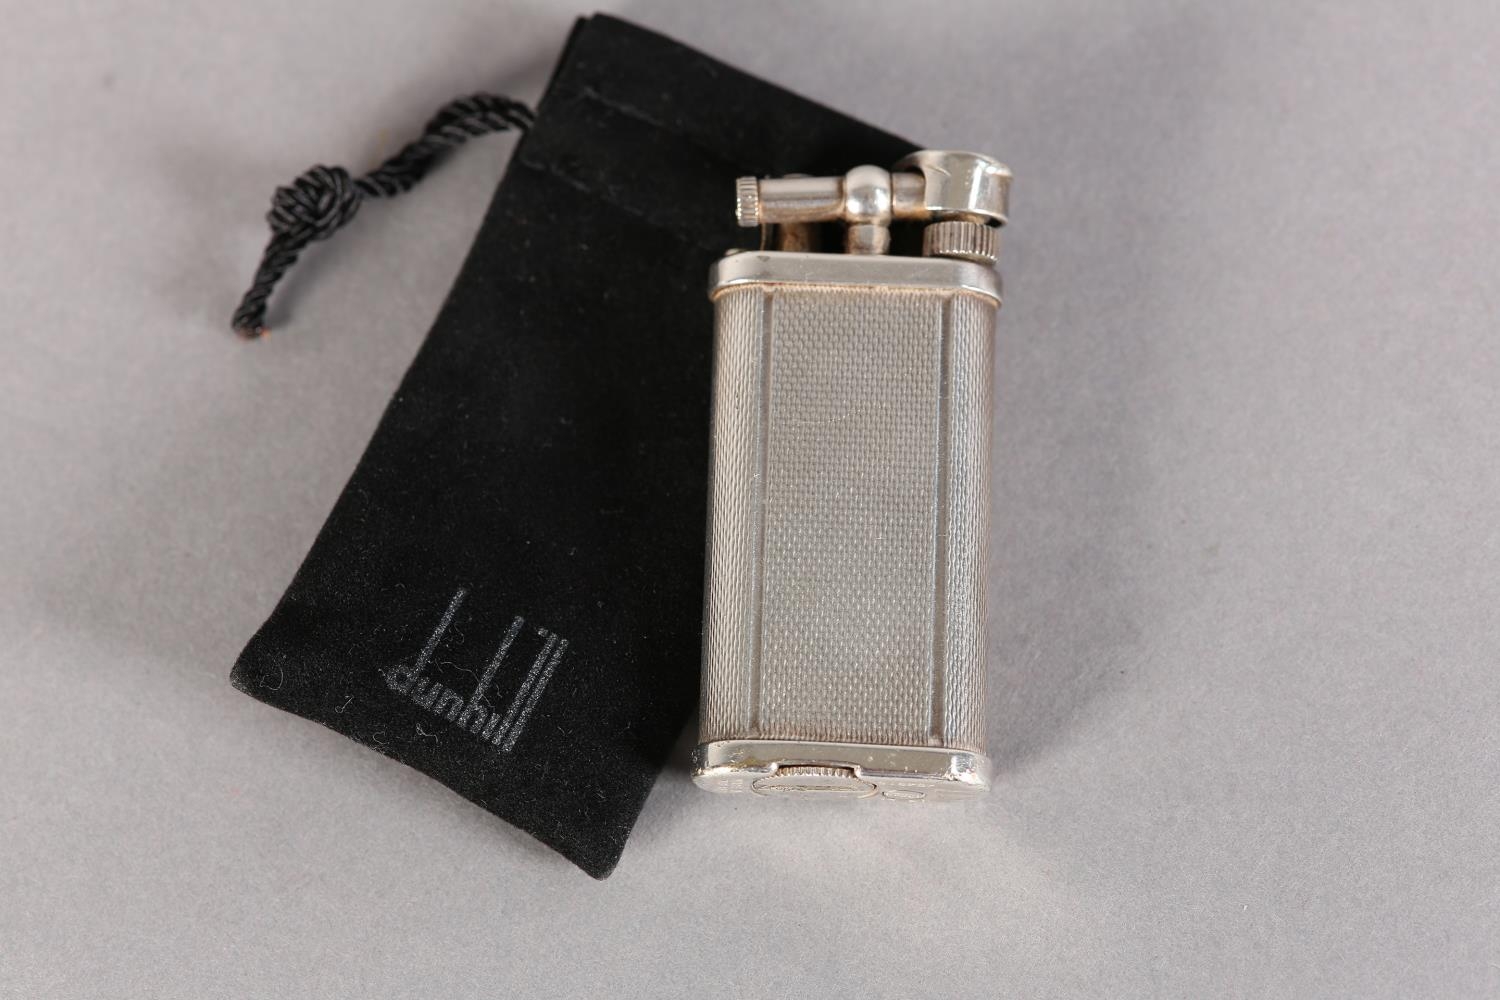 A DUNHILL 'UNIQUE' LIFT ARM PETROL LIGHTER No. 484316 engine turned, silver plated, signed and